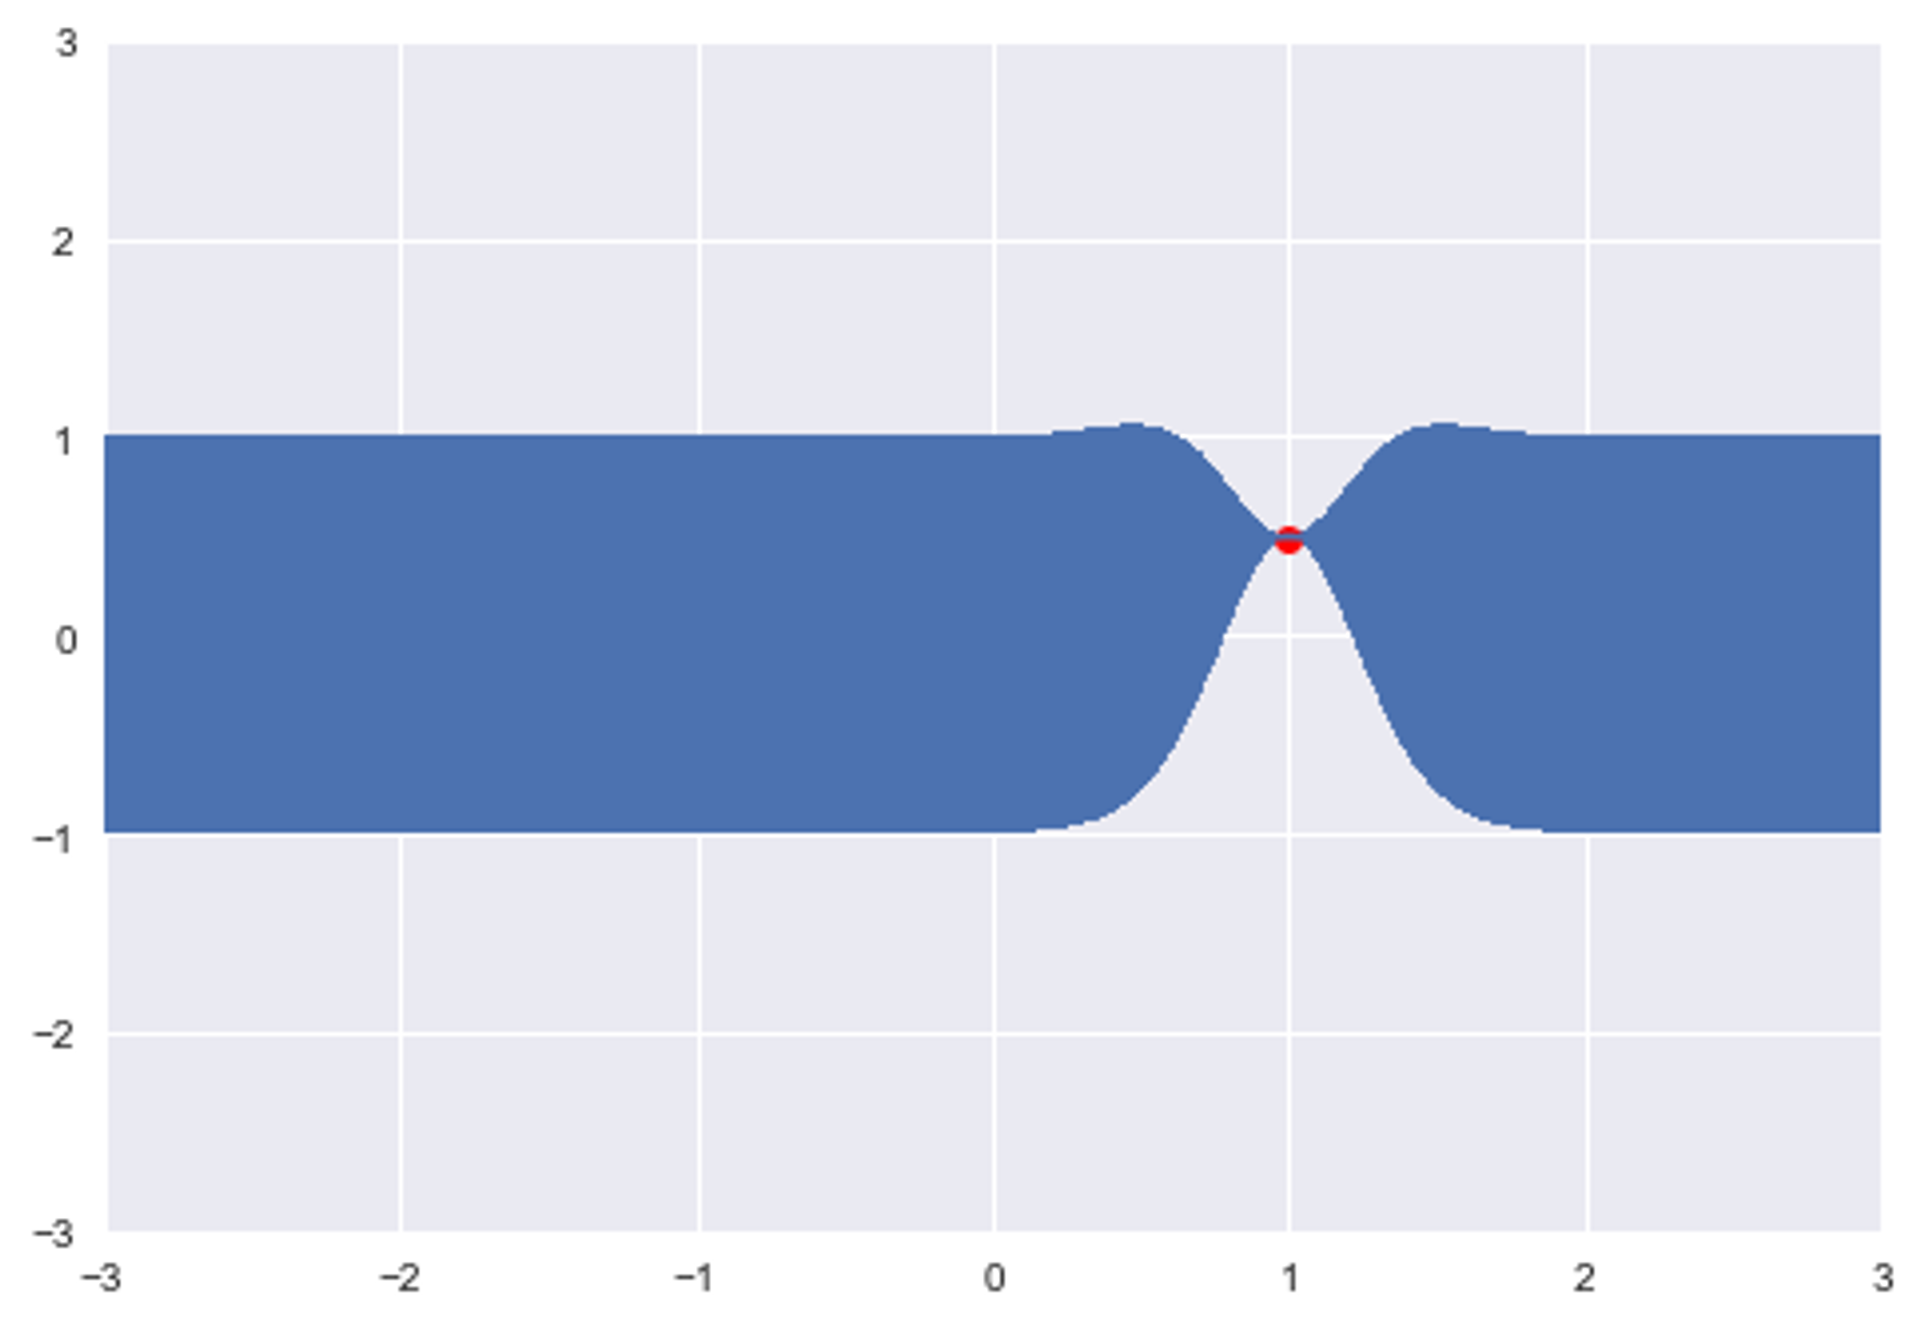 Output of Fitting Gaussian Process Models in Python